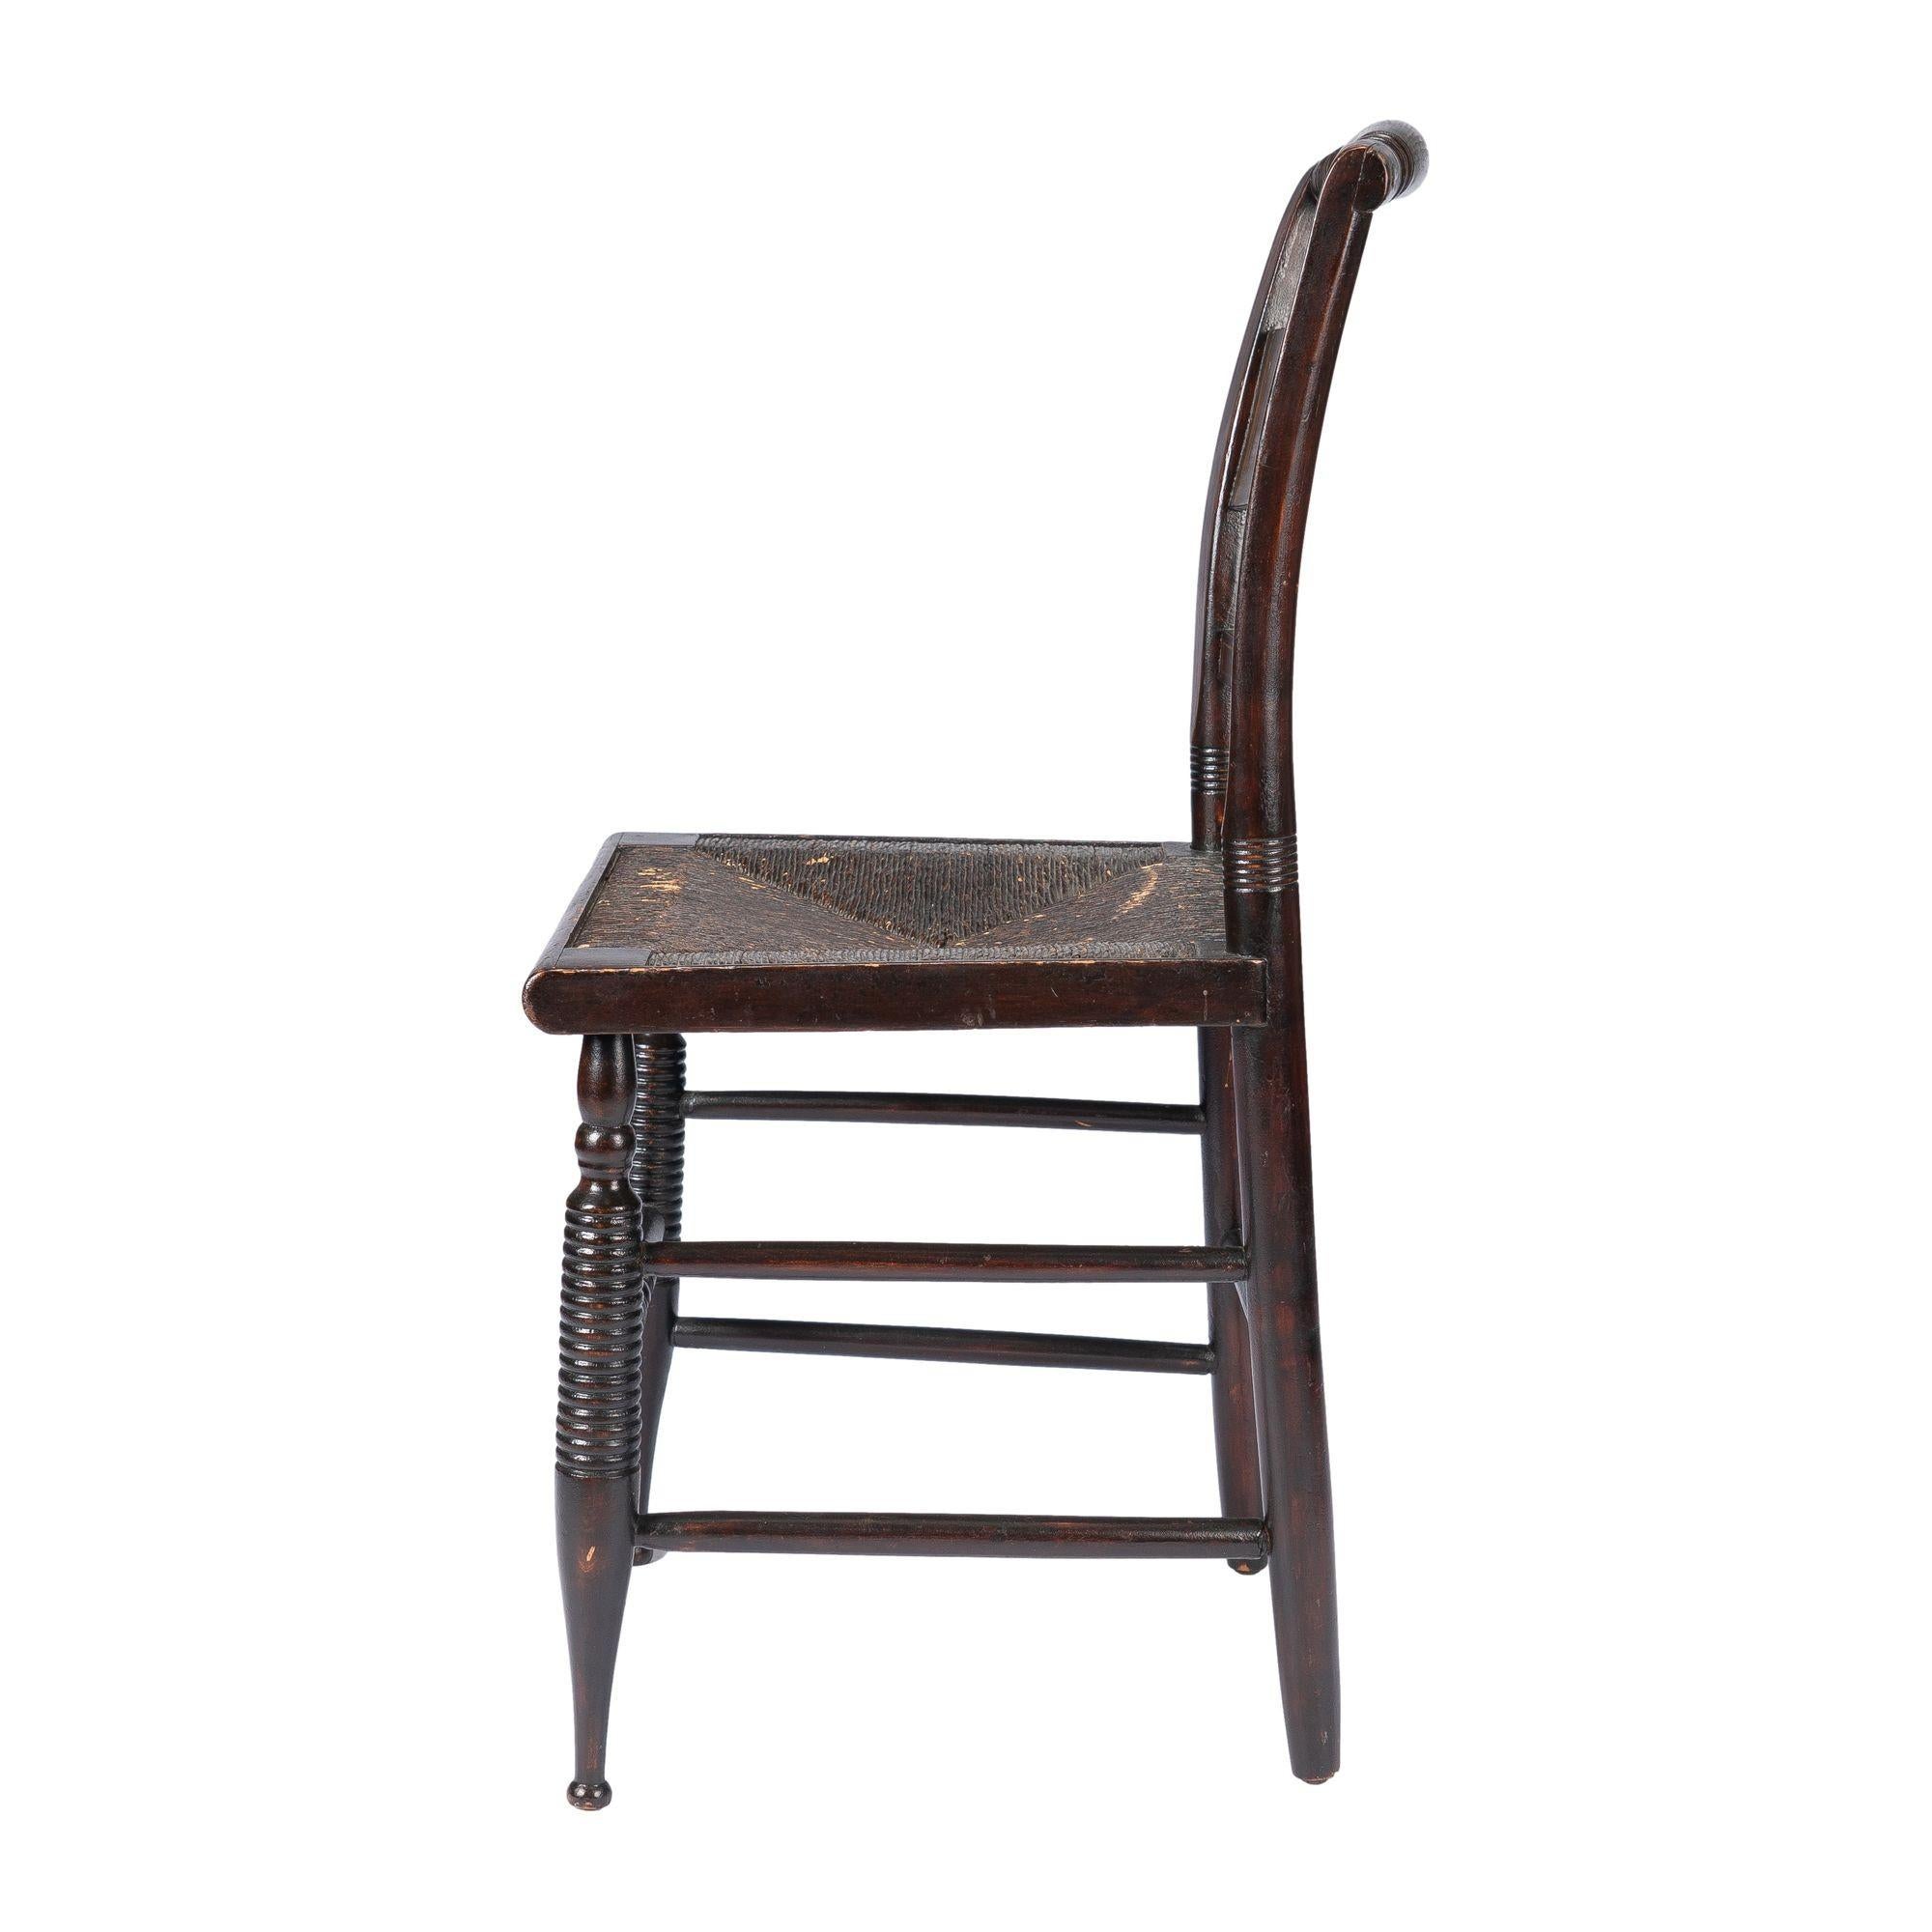 Sheraton Connecticut Valley Hitchcock rush seat side chair, 1820